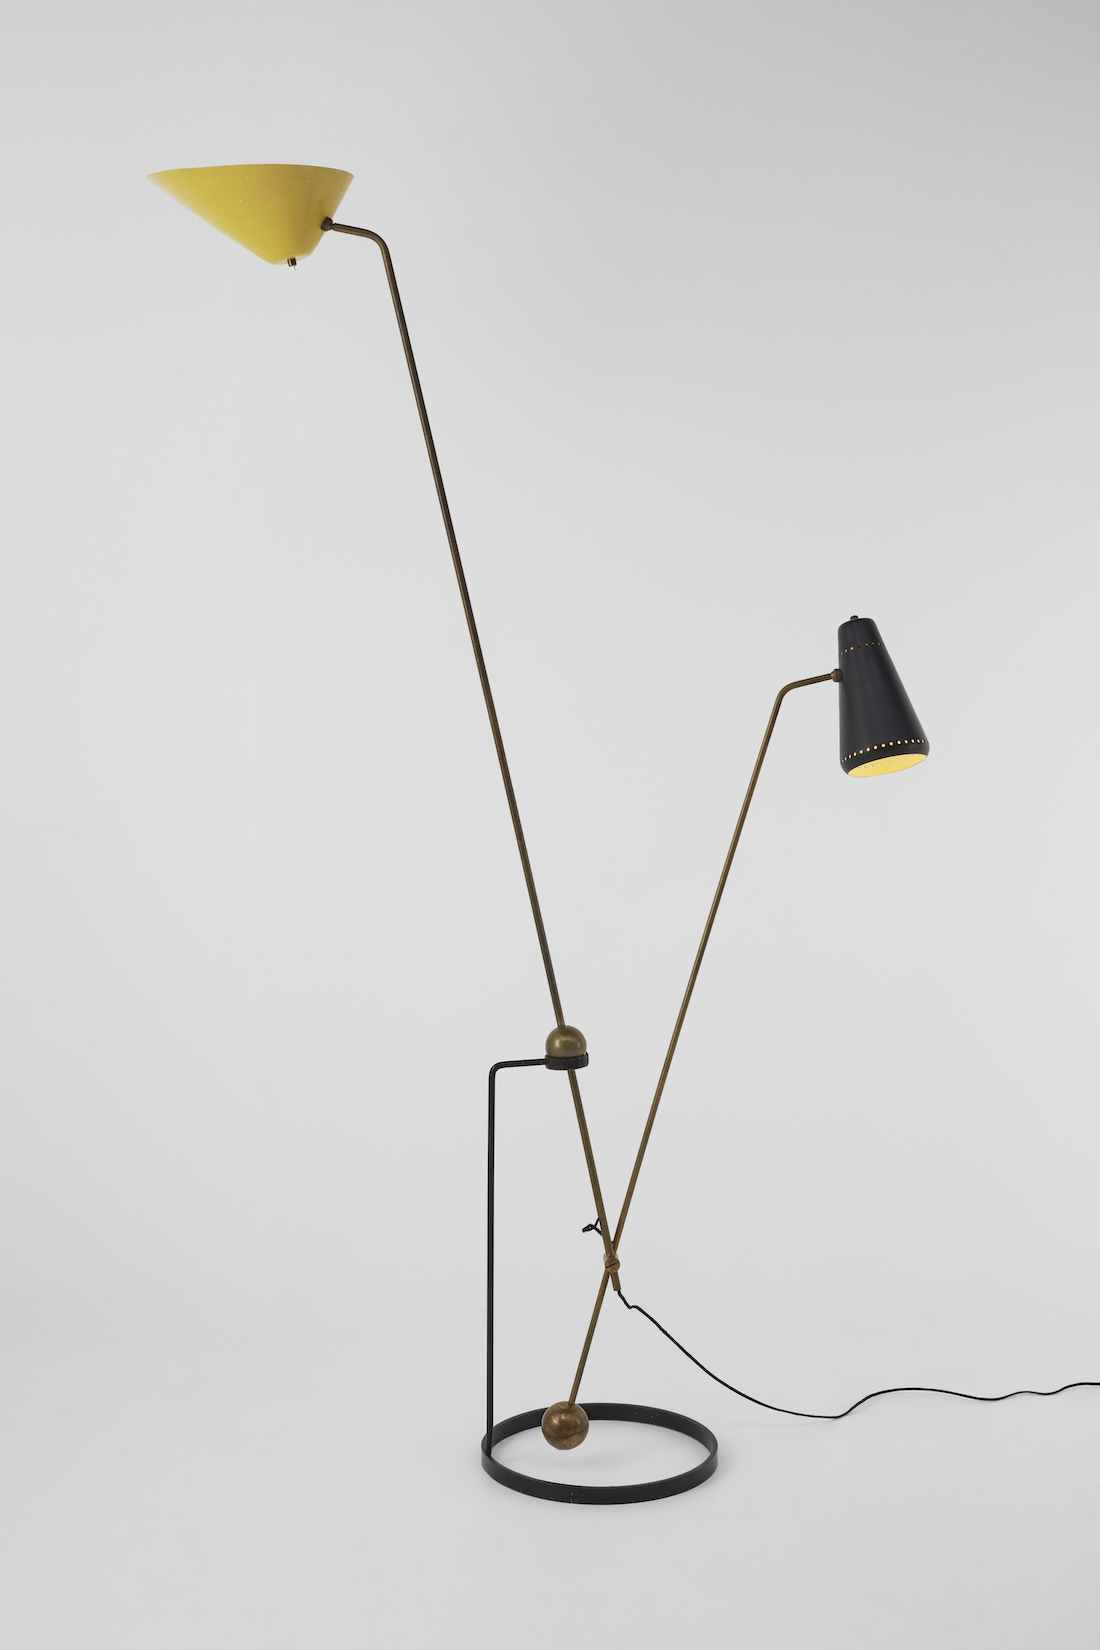 1951 floor lamp by Pierre Guariche, Galerie Pascal Cuisinier at BRAFA 2023 in Effect Magazine